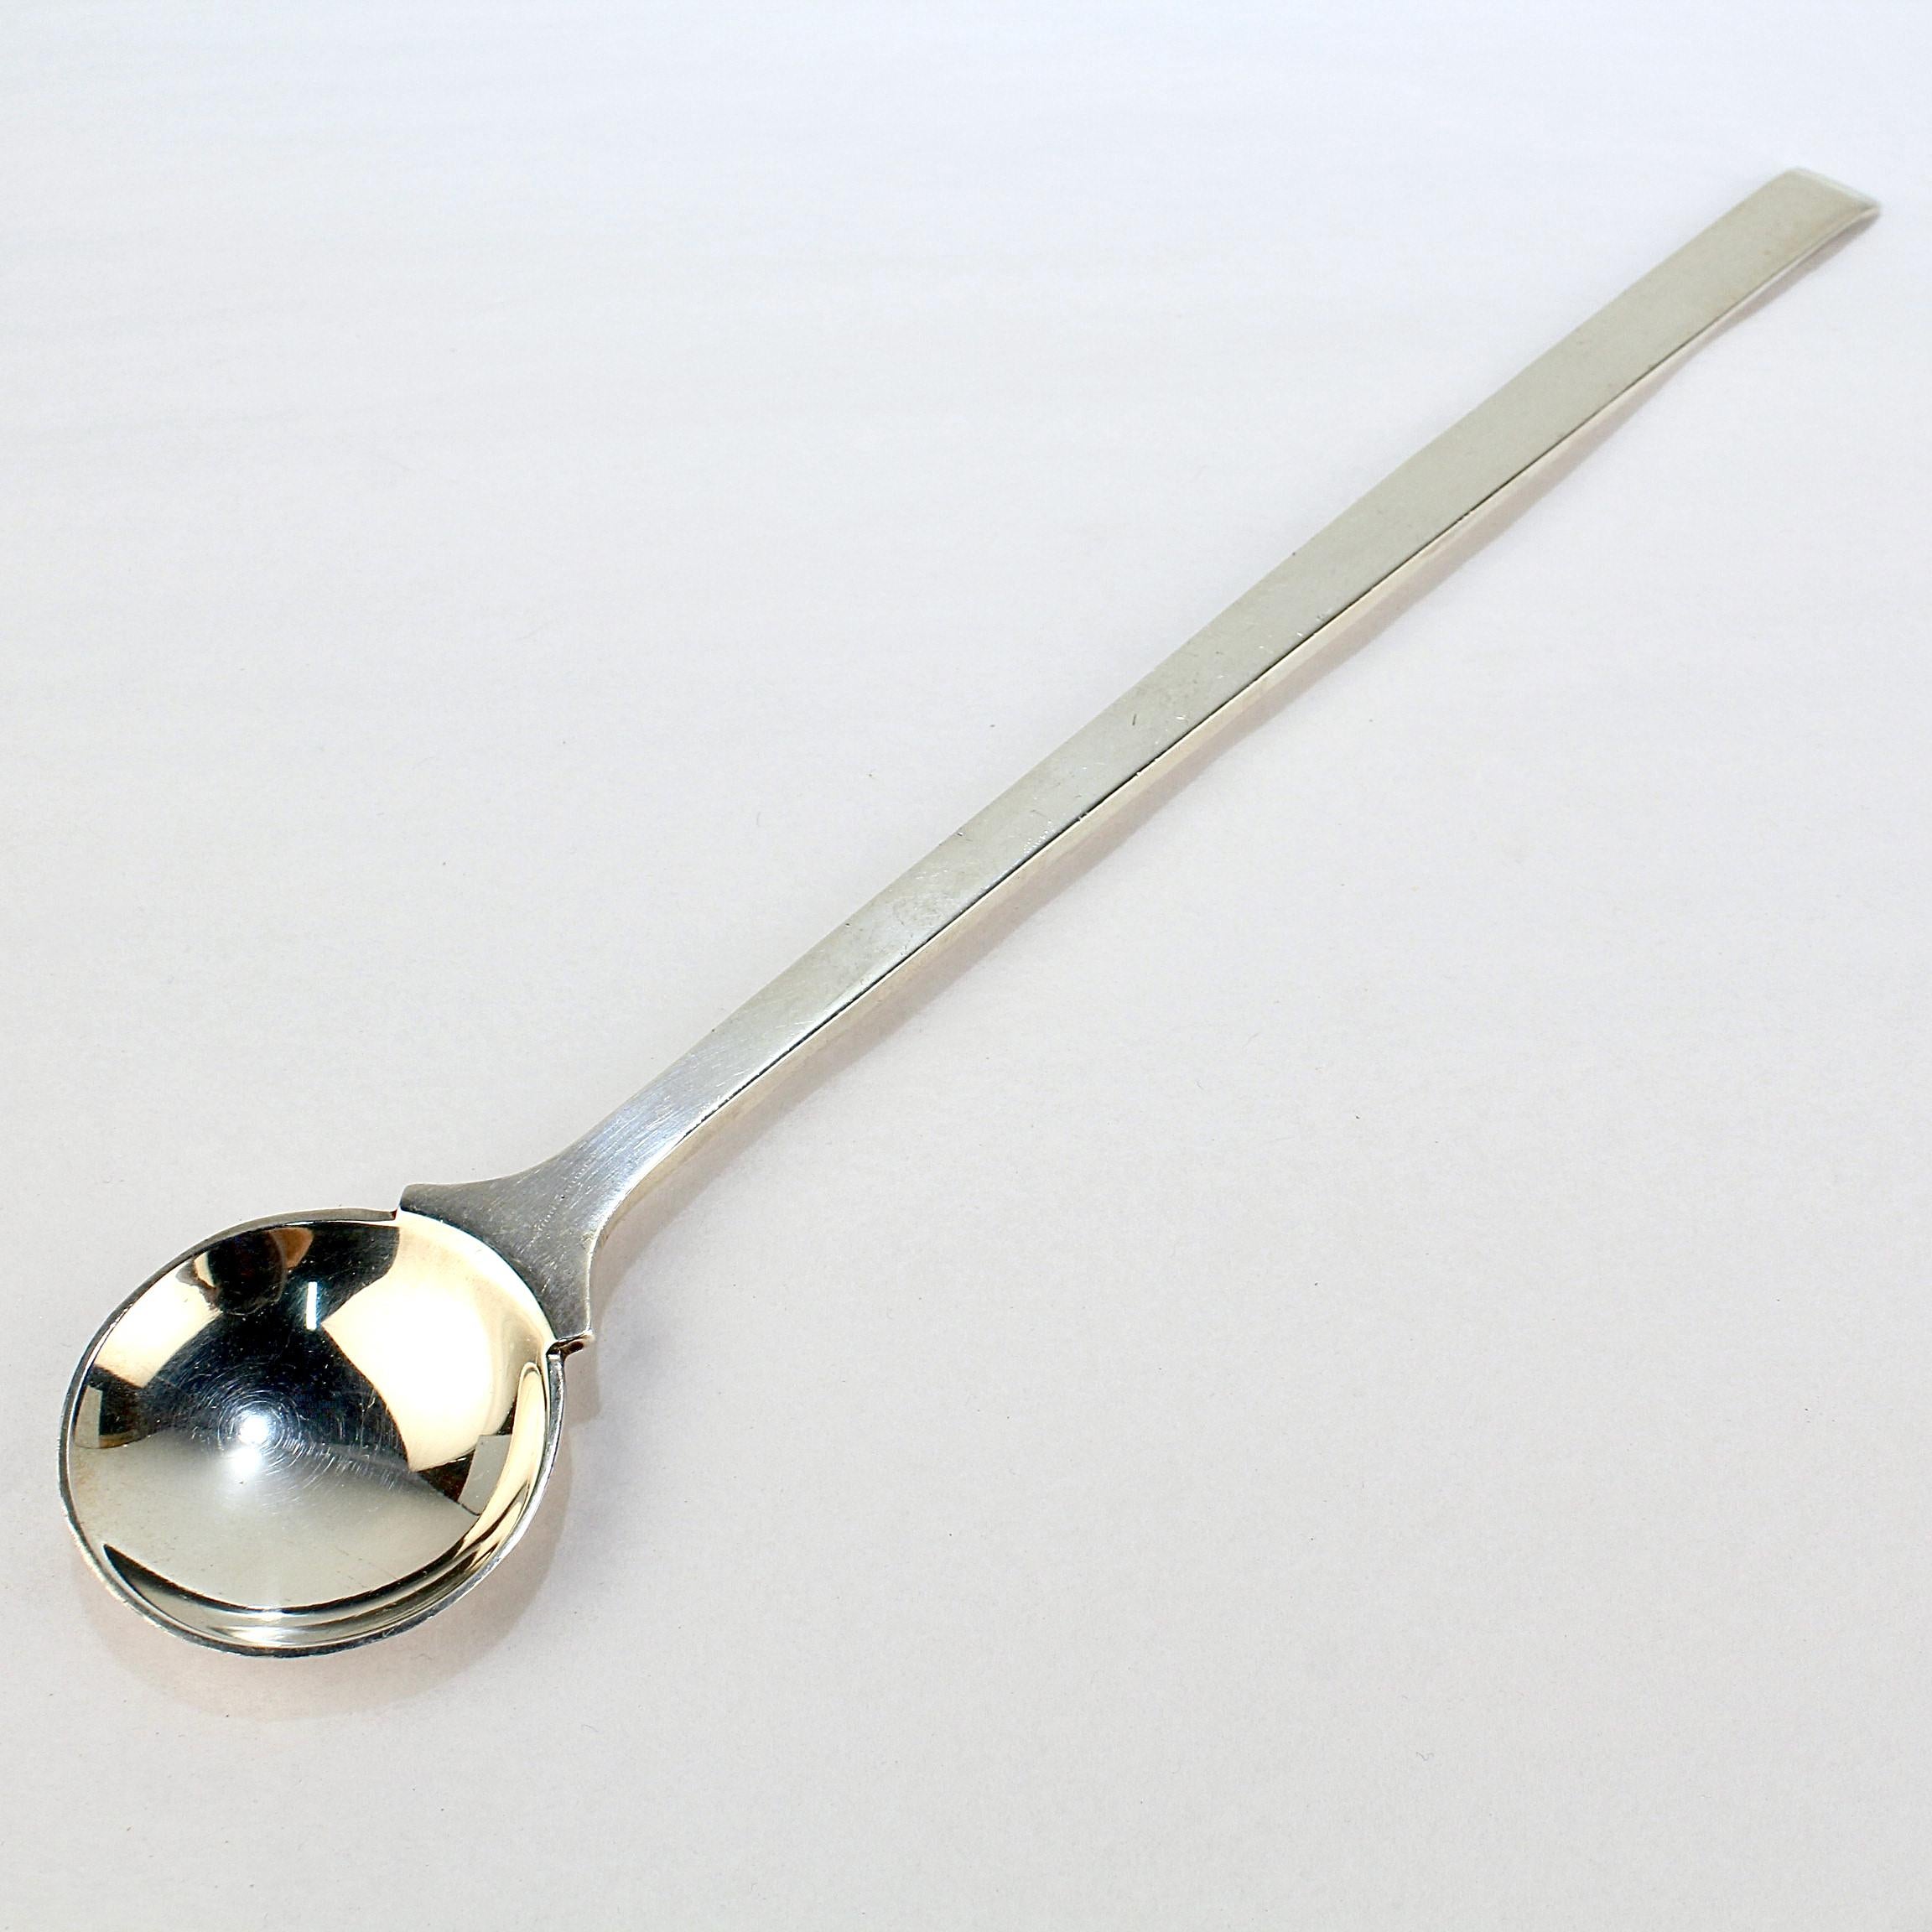 A fine sterling silver cocktail spoon.

Made for the Steuben Glassworks. 

The spoon is the perfect partner to a Steuben cocktail pitcher. 

Simply a wonderful addition to any high-level Steuben collection!

Date:
20th Century

Overall Condition:
It